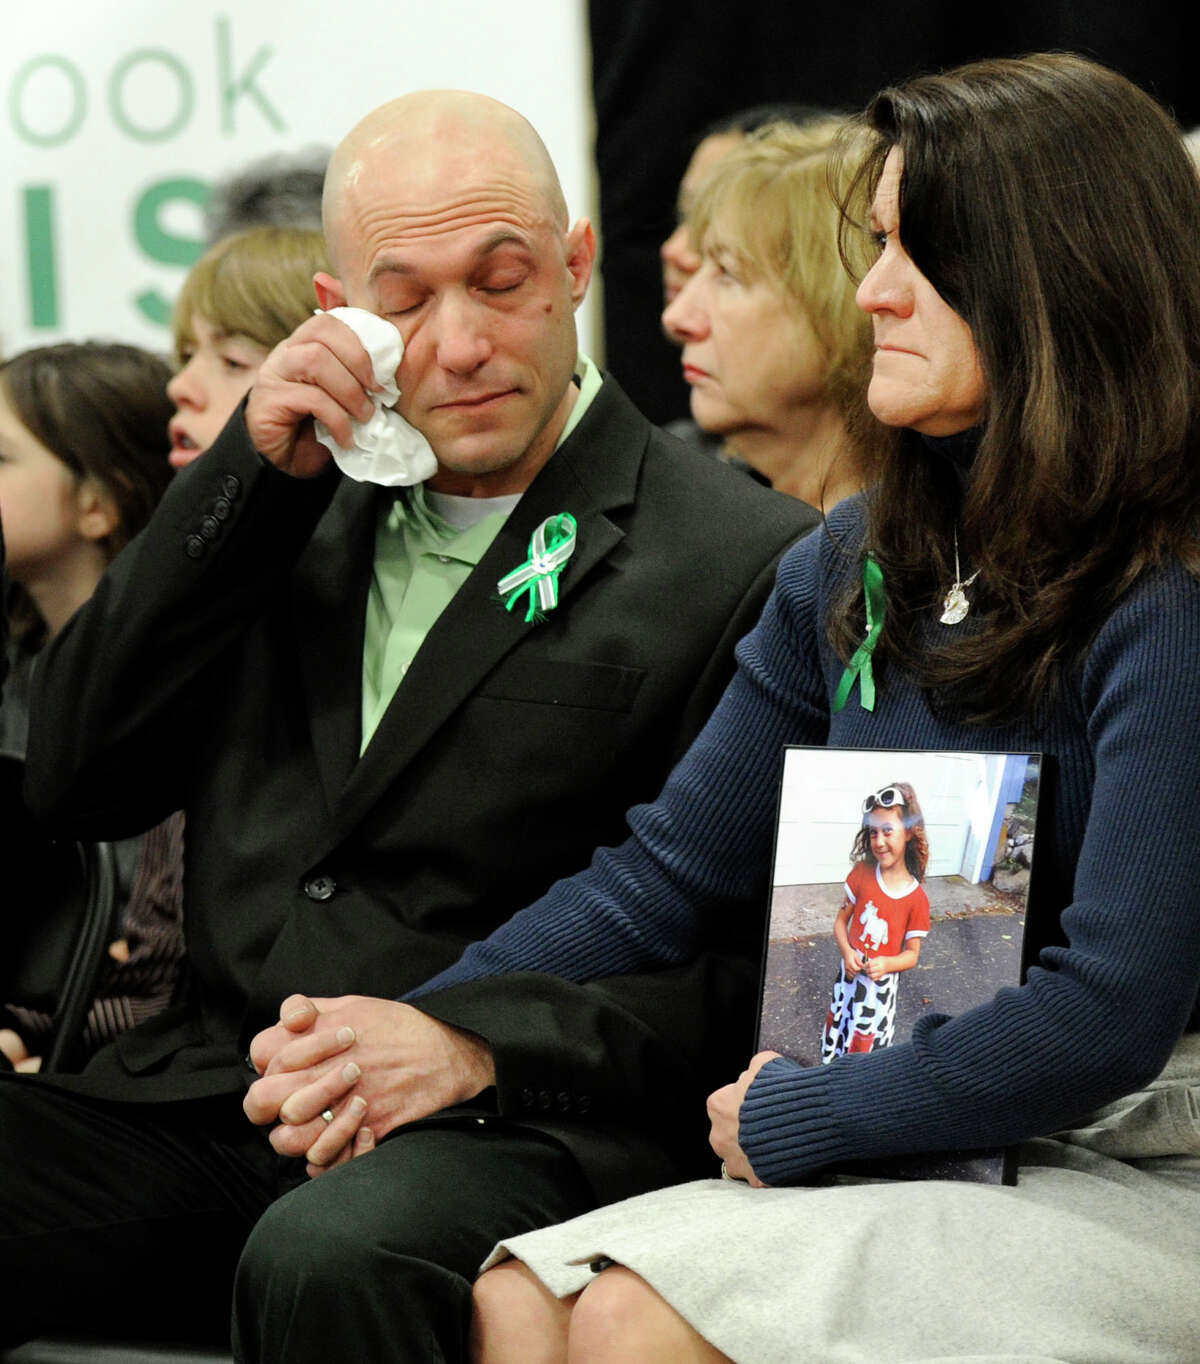 Jeremy Richman and Jennifer Hensel, parents of Avielle, one of the children killed in the Sandy Hook Elementary School shootings.